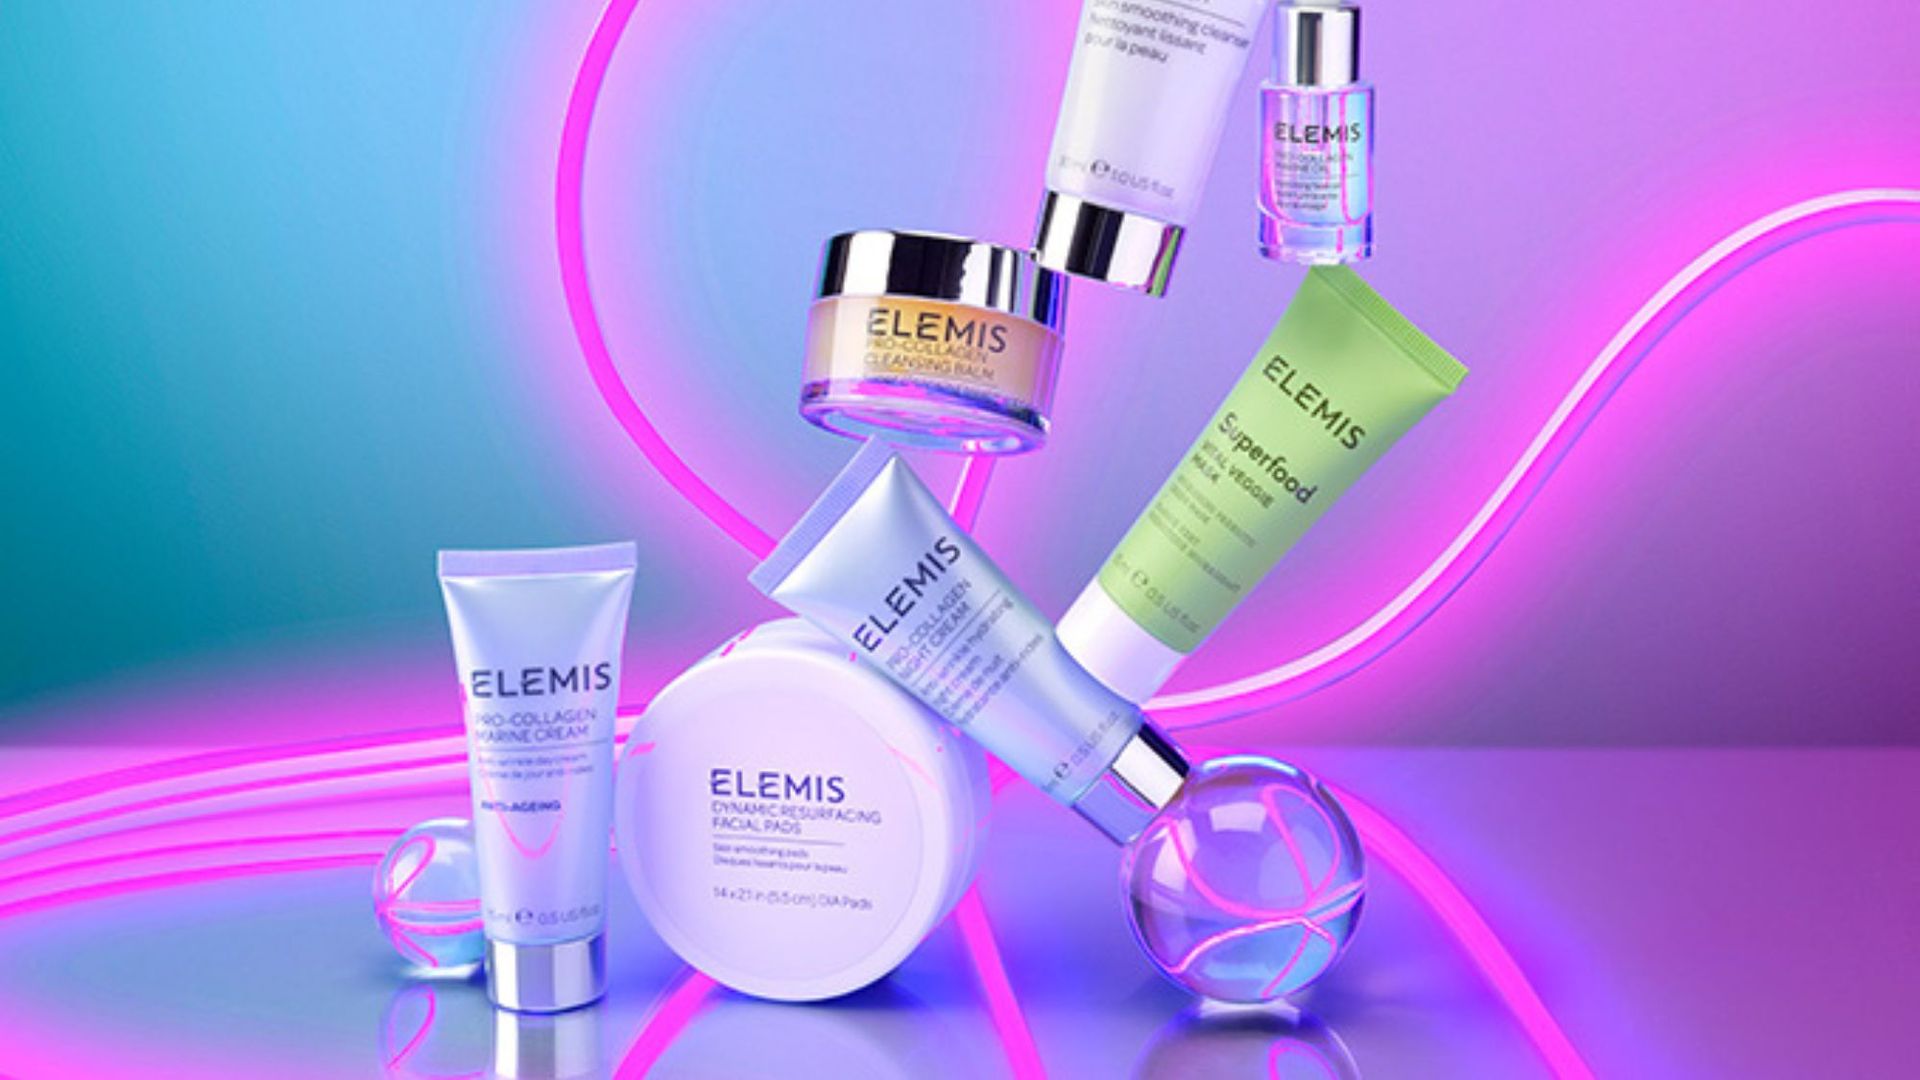 The ELEMIS Black Friday sale has started and there's 35 off the iconic